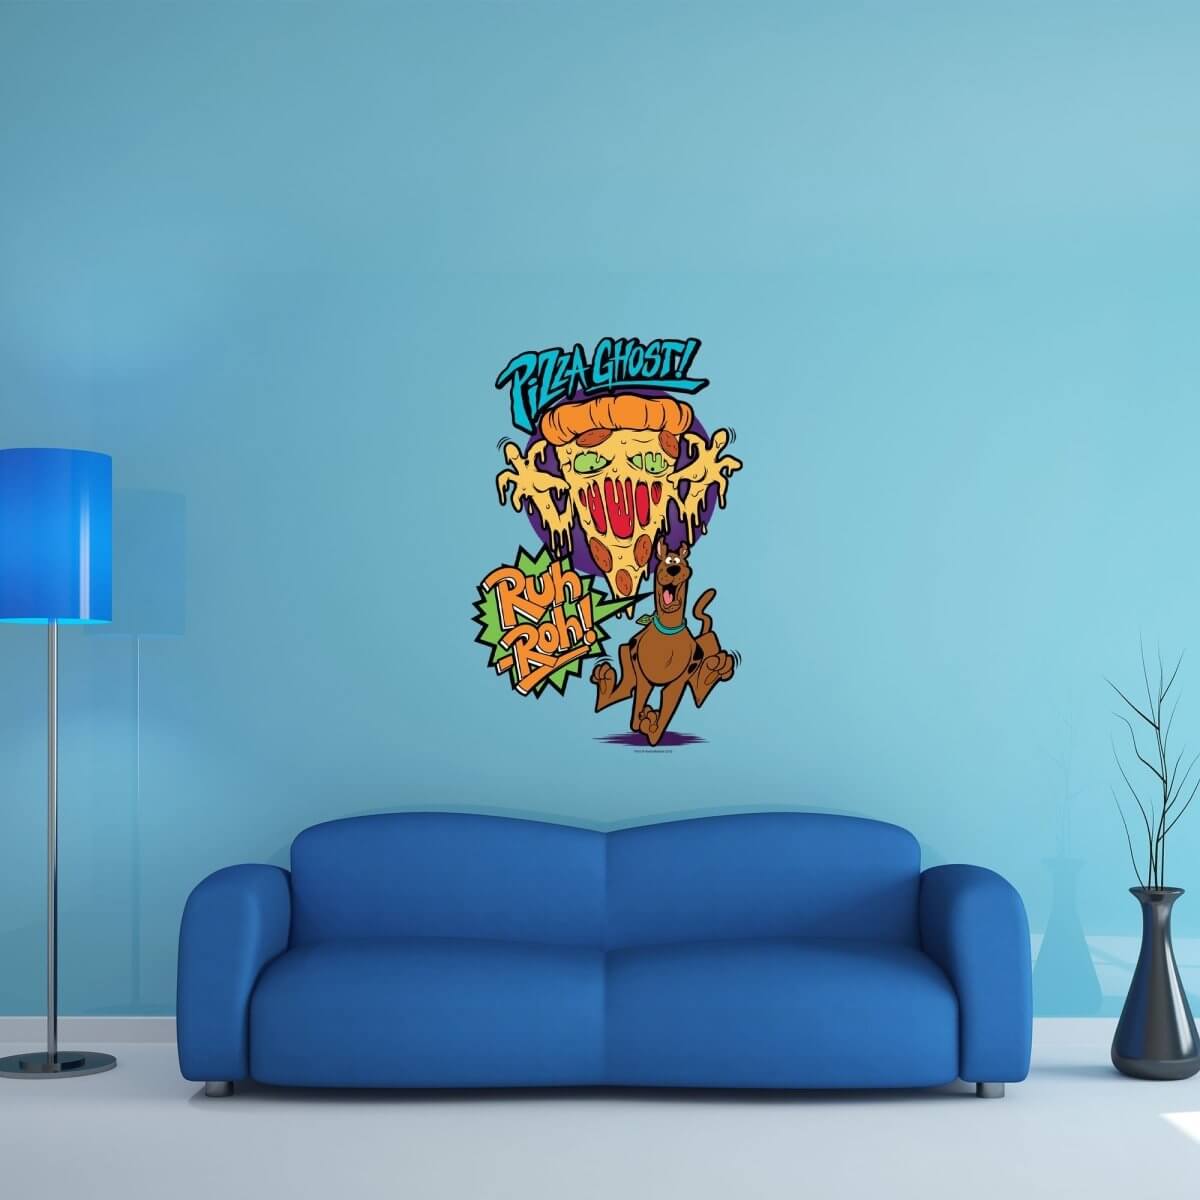 Kismet Decals Home & Room Decor Scooby-Doo and the Pizza Ghost Wall decal sticker - officially licensed - latex printed with no solvent odor - Kismet Decals